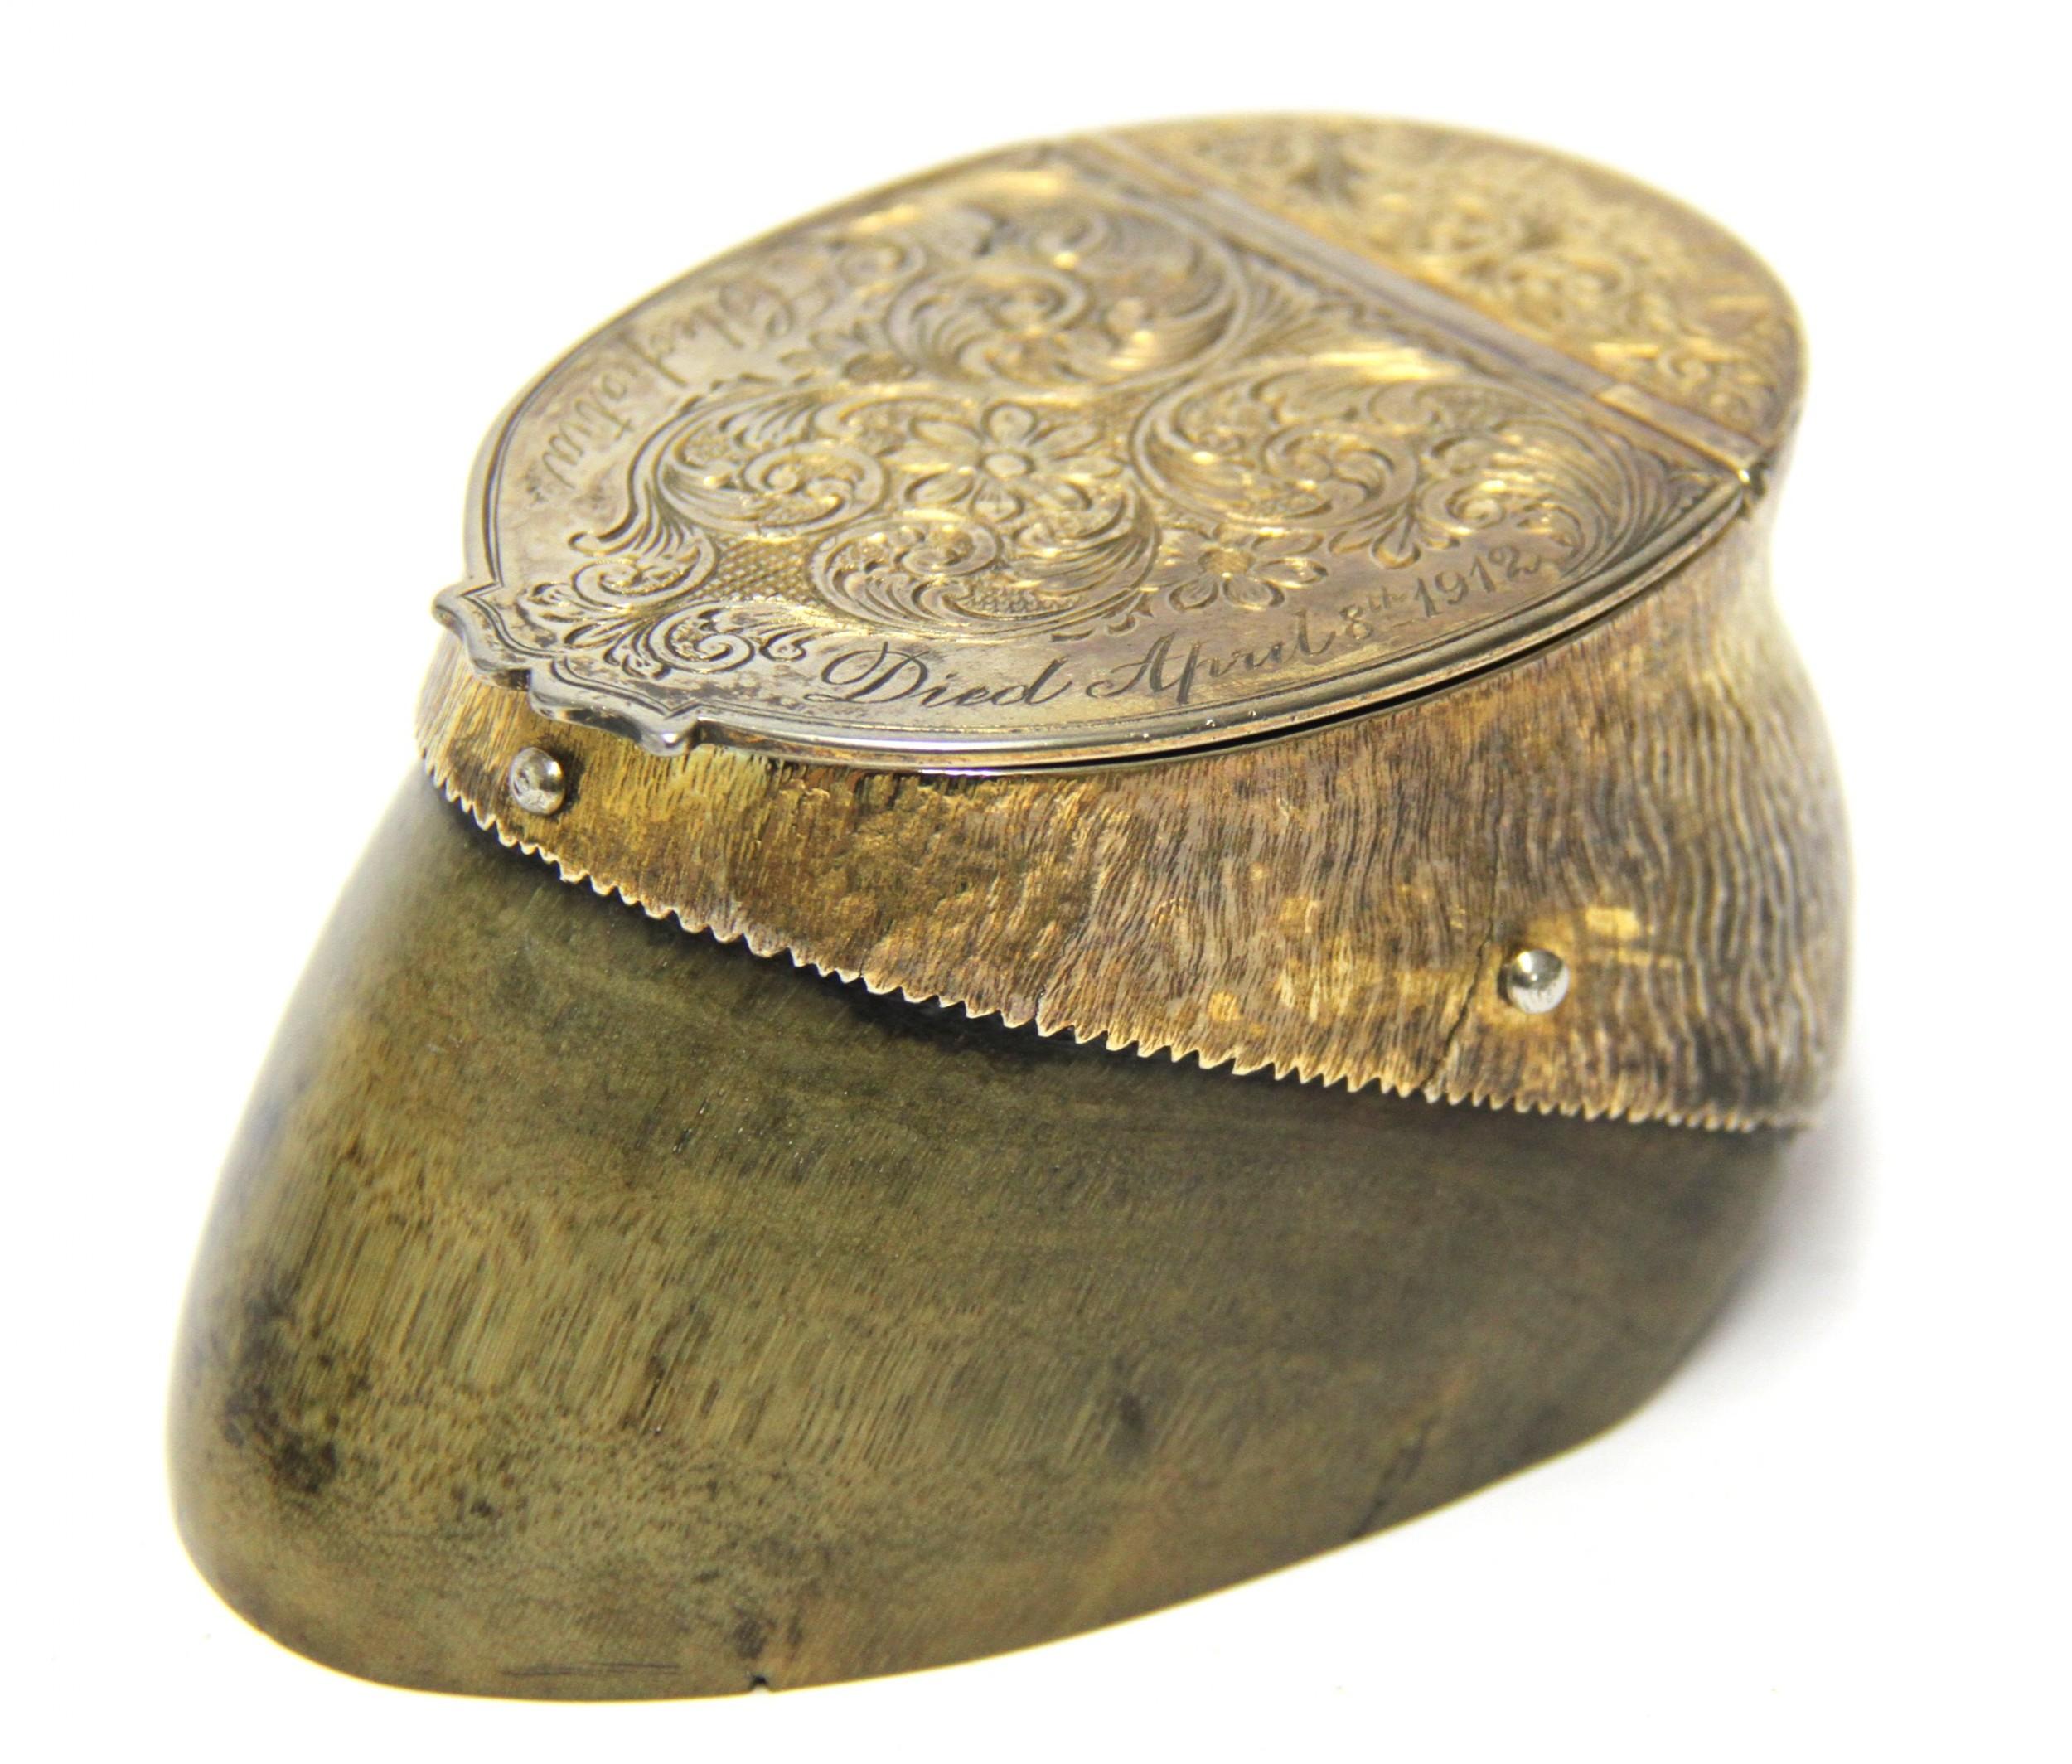 This rather quirky item was made from the hoof of a deer from the County estate in Herefordshire of Stoke Edith.
It has been fully mounted and turned into a desk inkwell with gilt brass mounts and a hinged lid with the inscription: Stoke Edith